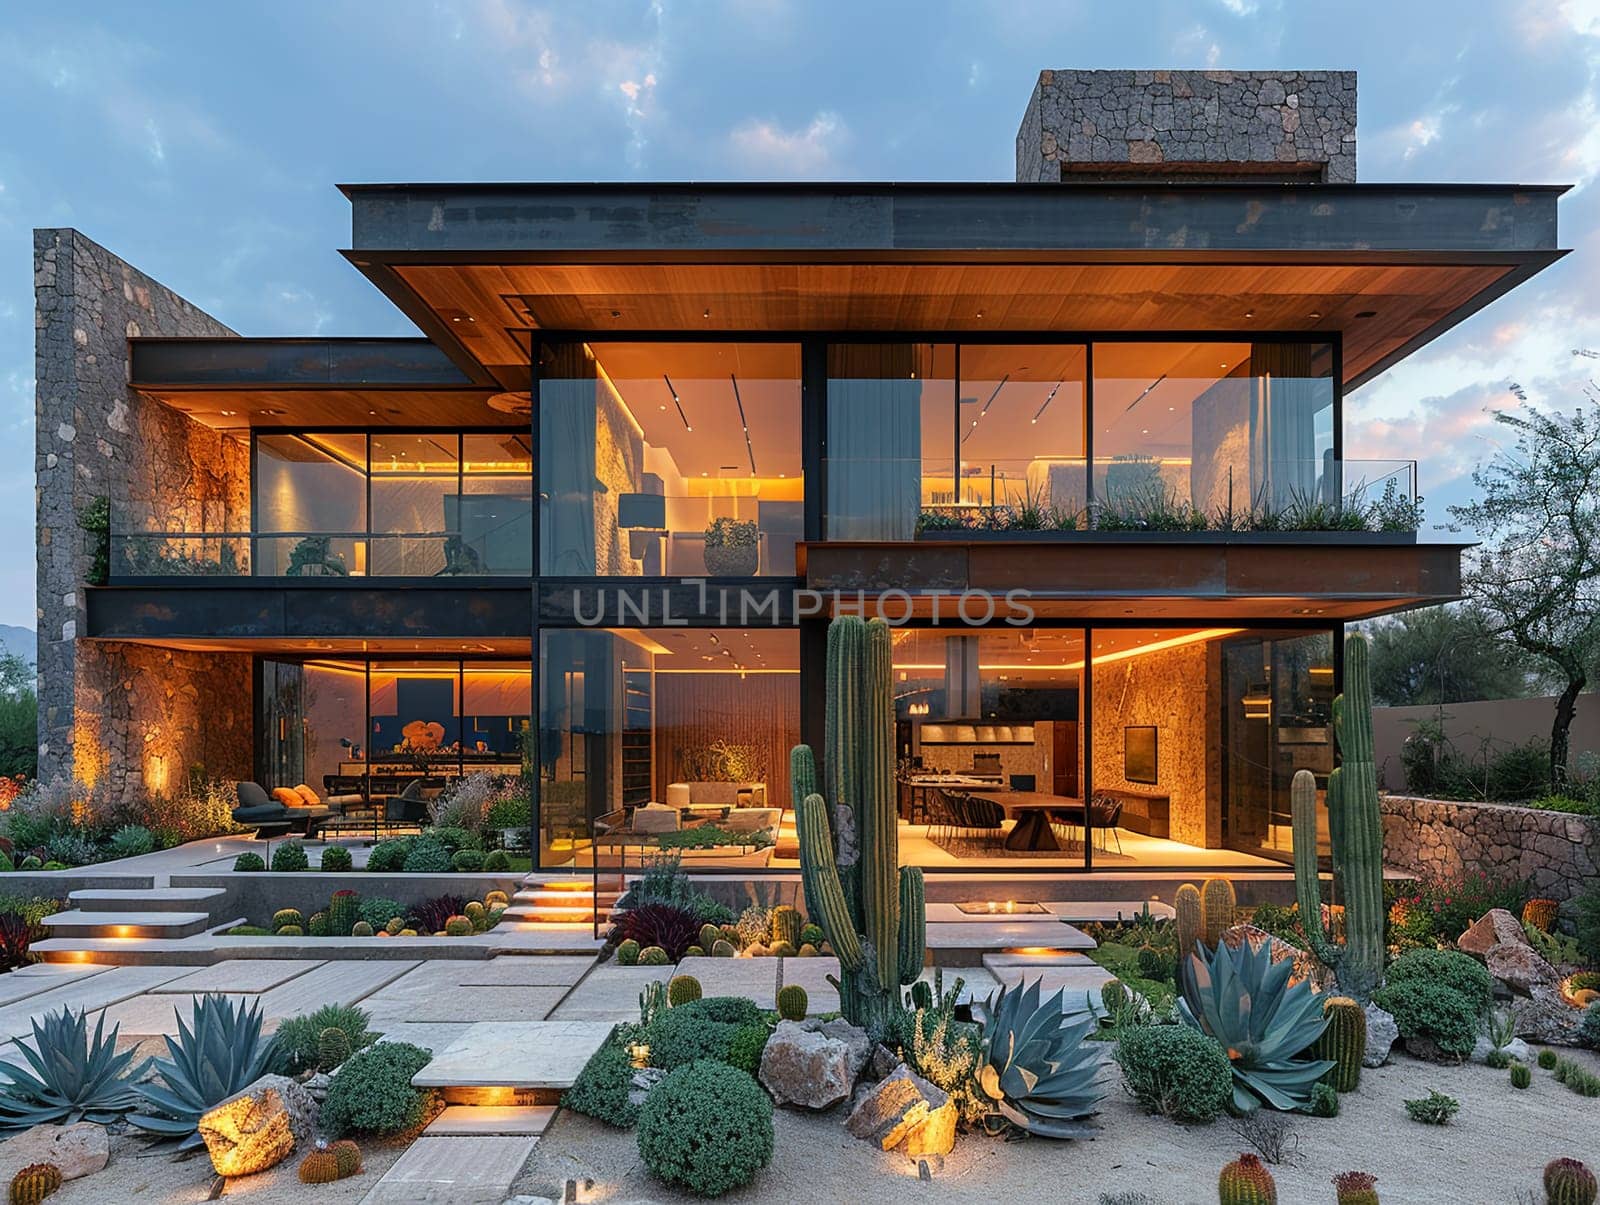 Modern desert home with large windows and cactus gardens